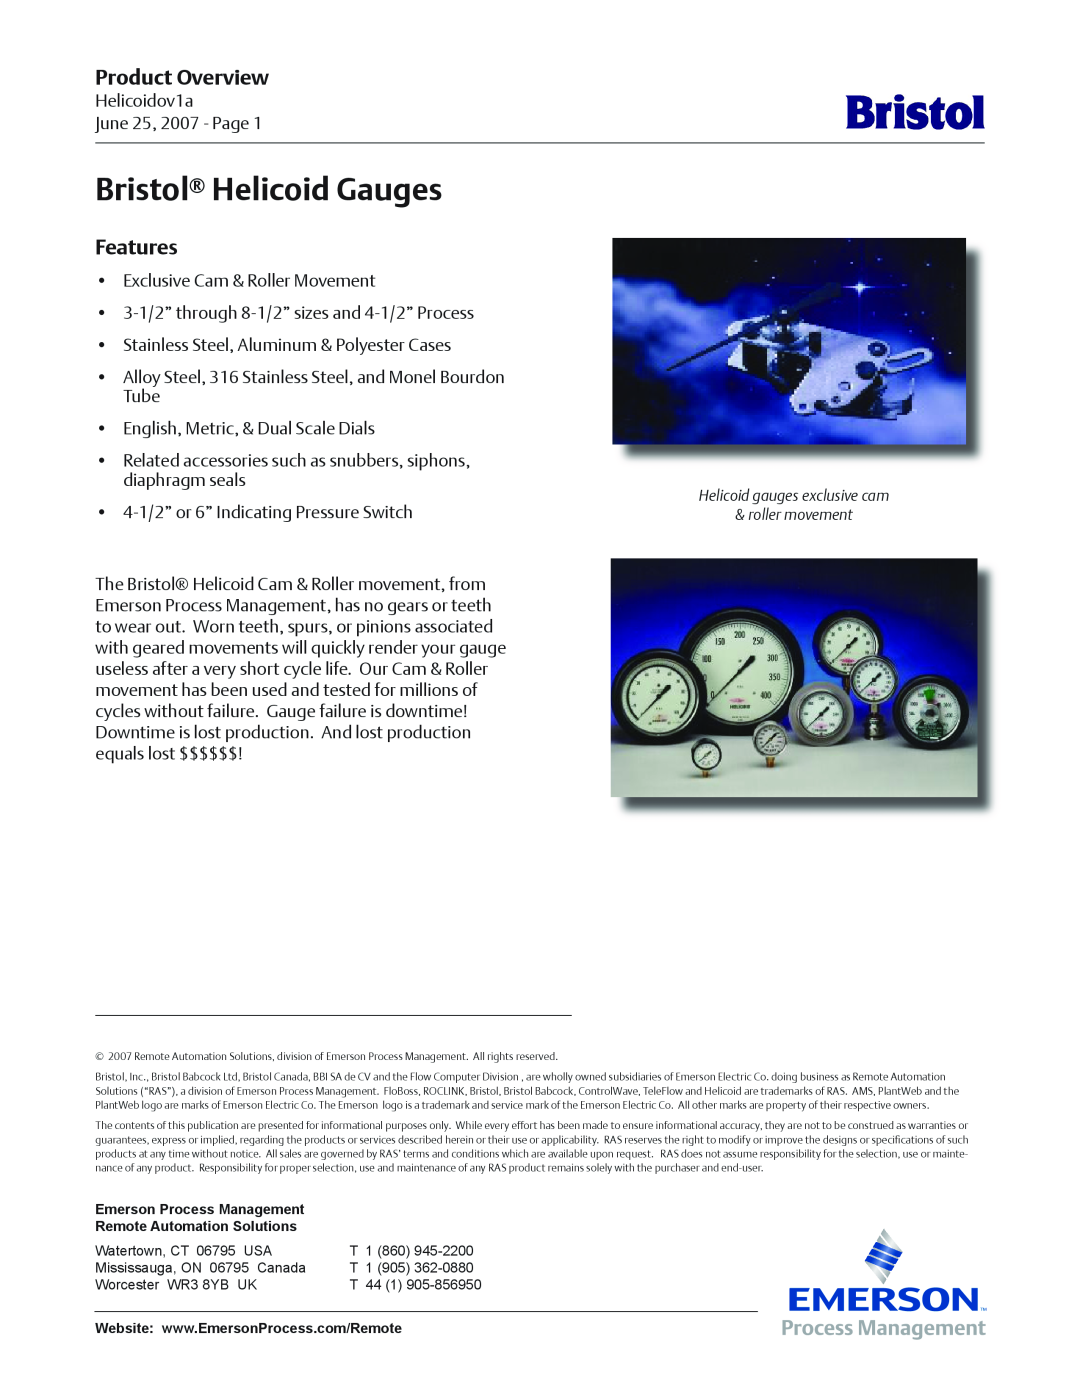 Emerson Process Management manual Bristol Helicoid Gauges, Product Overview, Features 